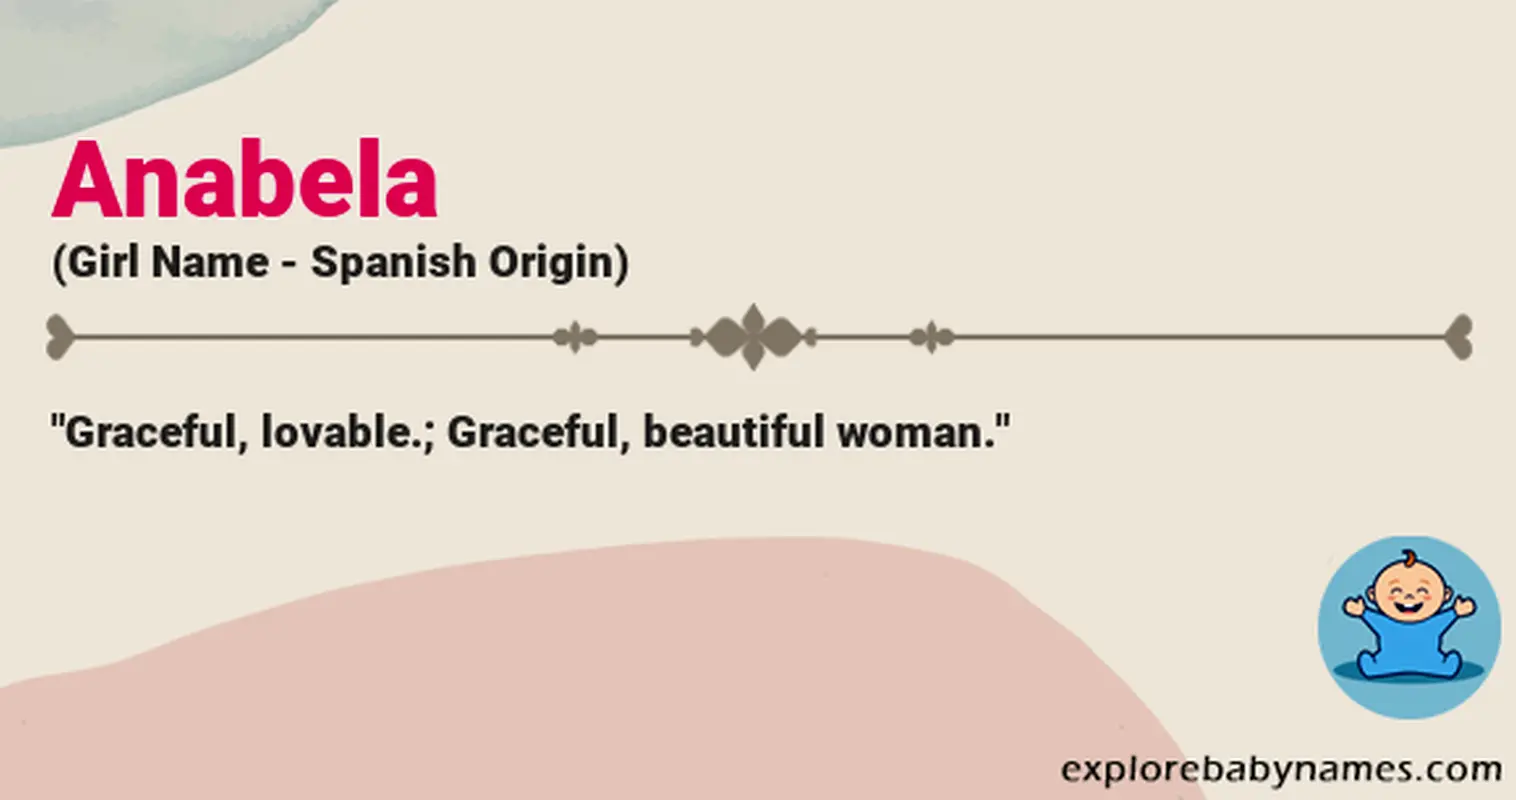 Meaning of Anabela